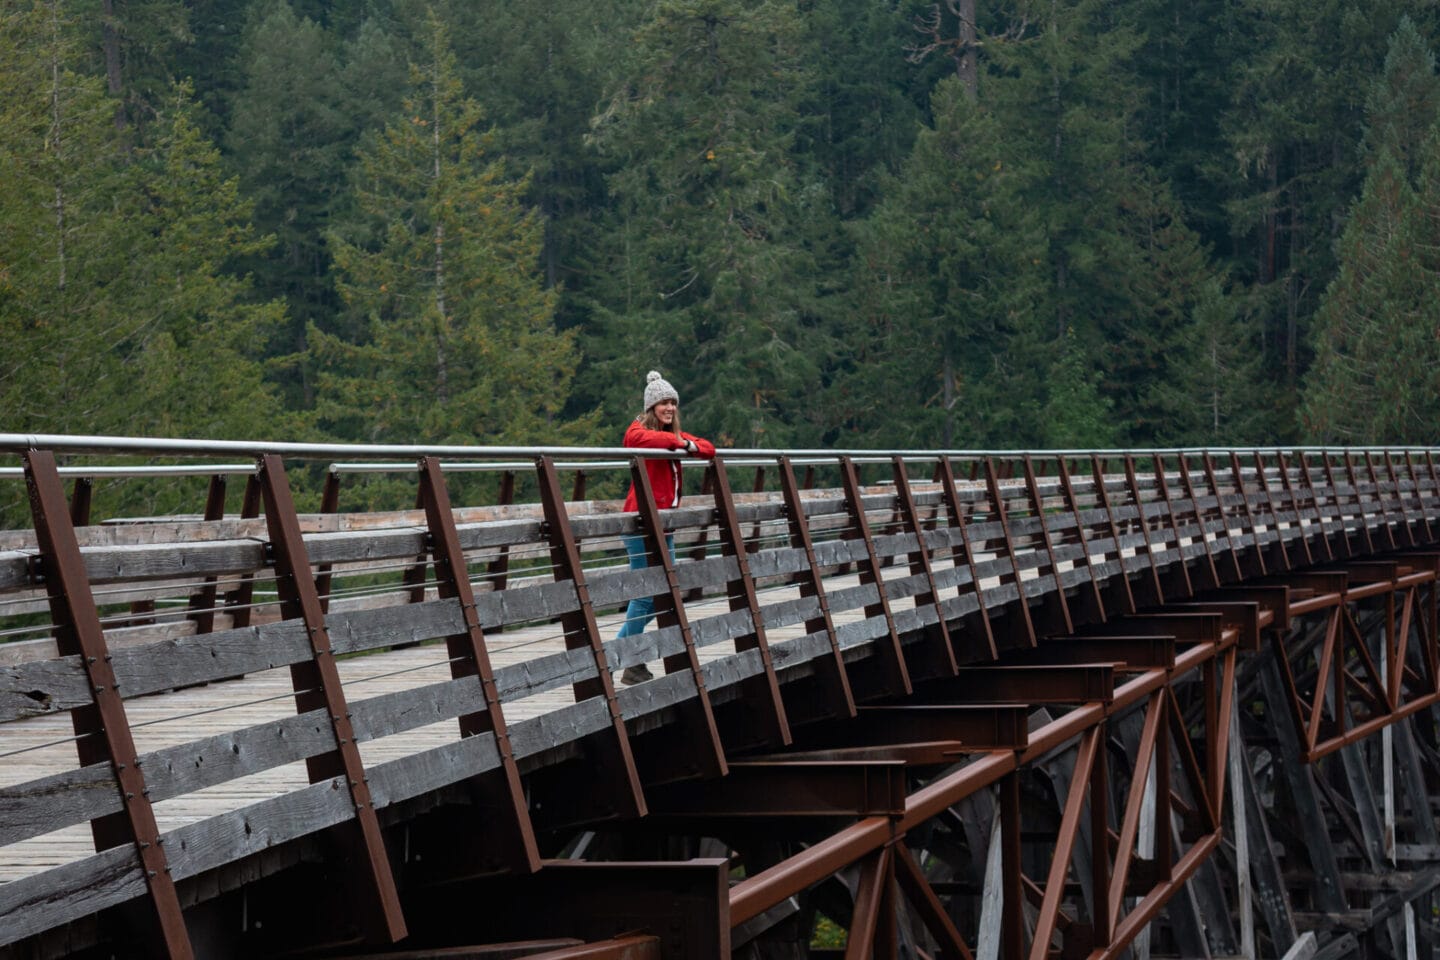 Kinsol Trestle is a popular attraction in Cowichan Valley